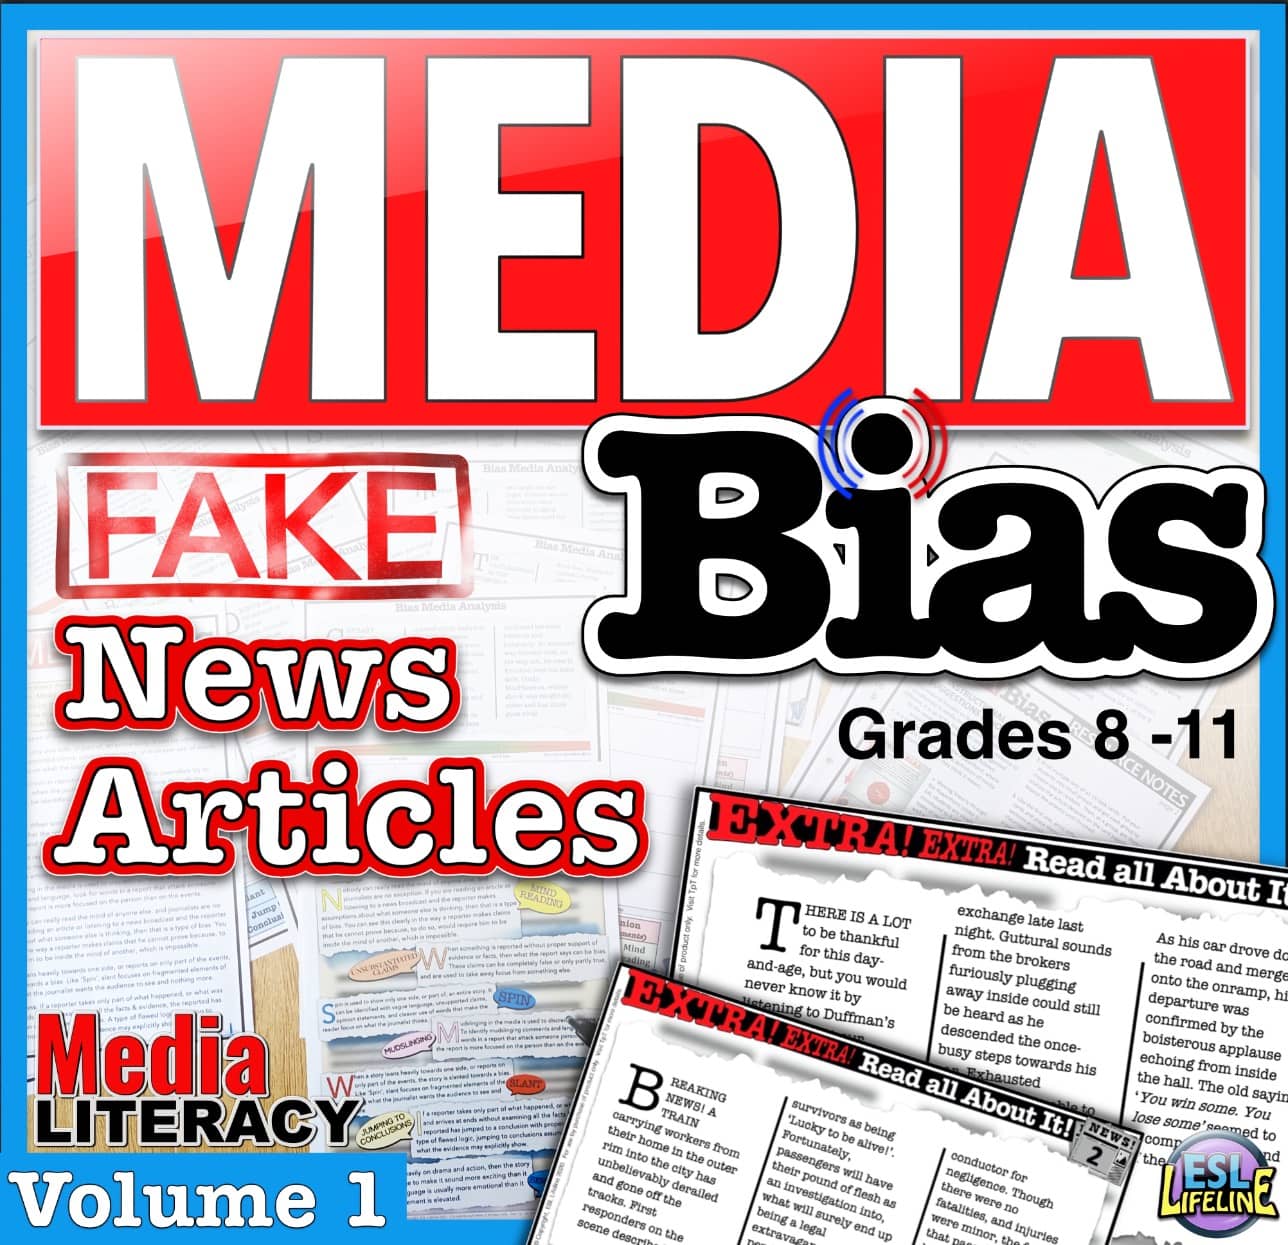 Media bias fake news articles for learning to detect bias in the media